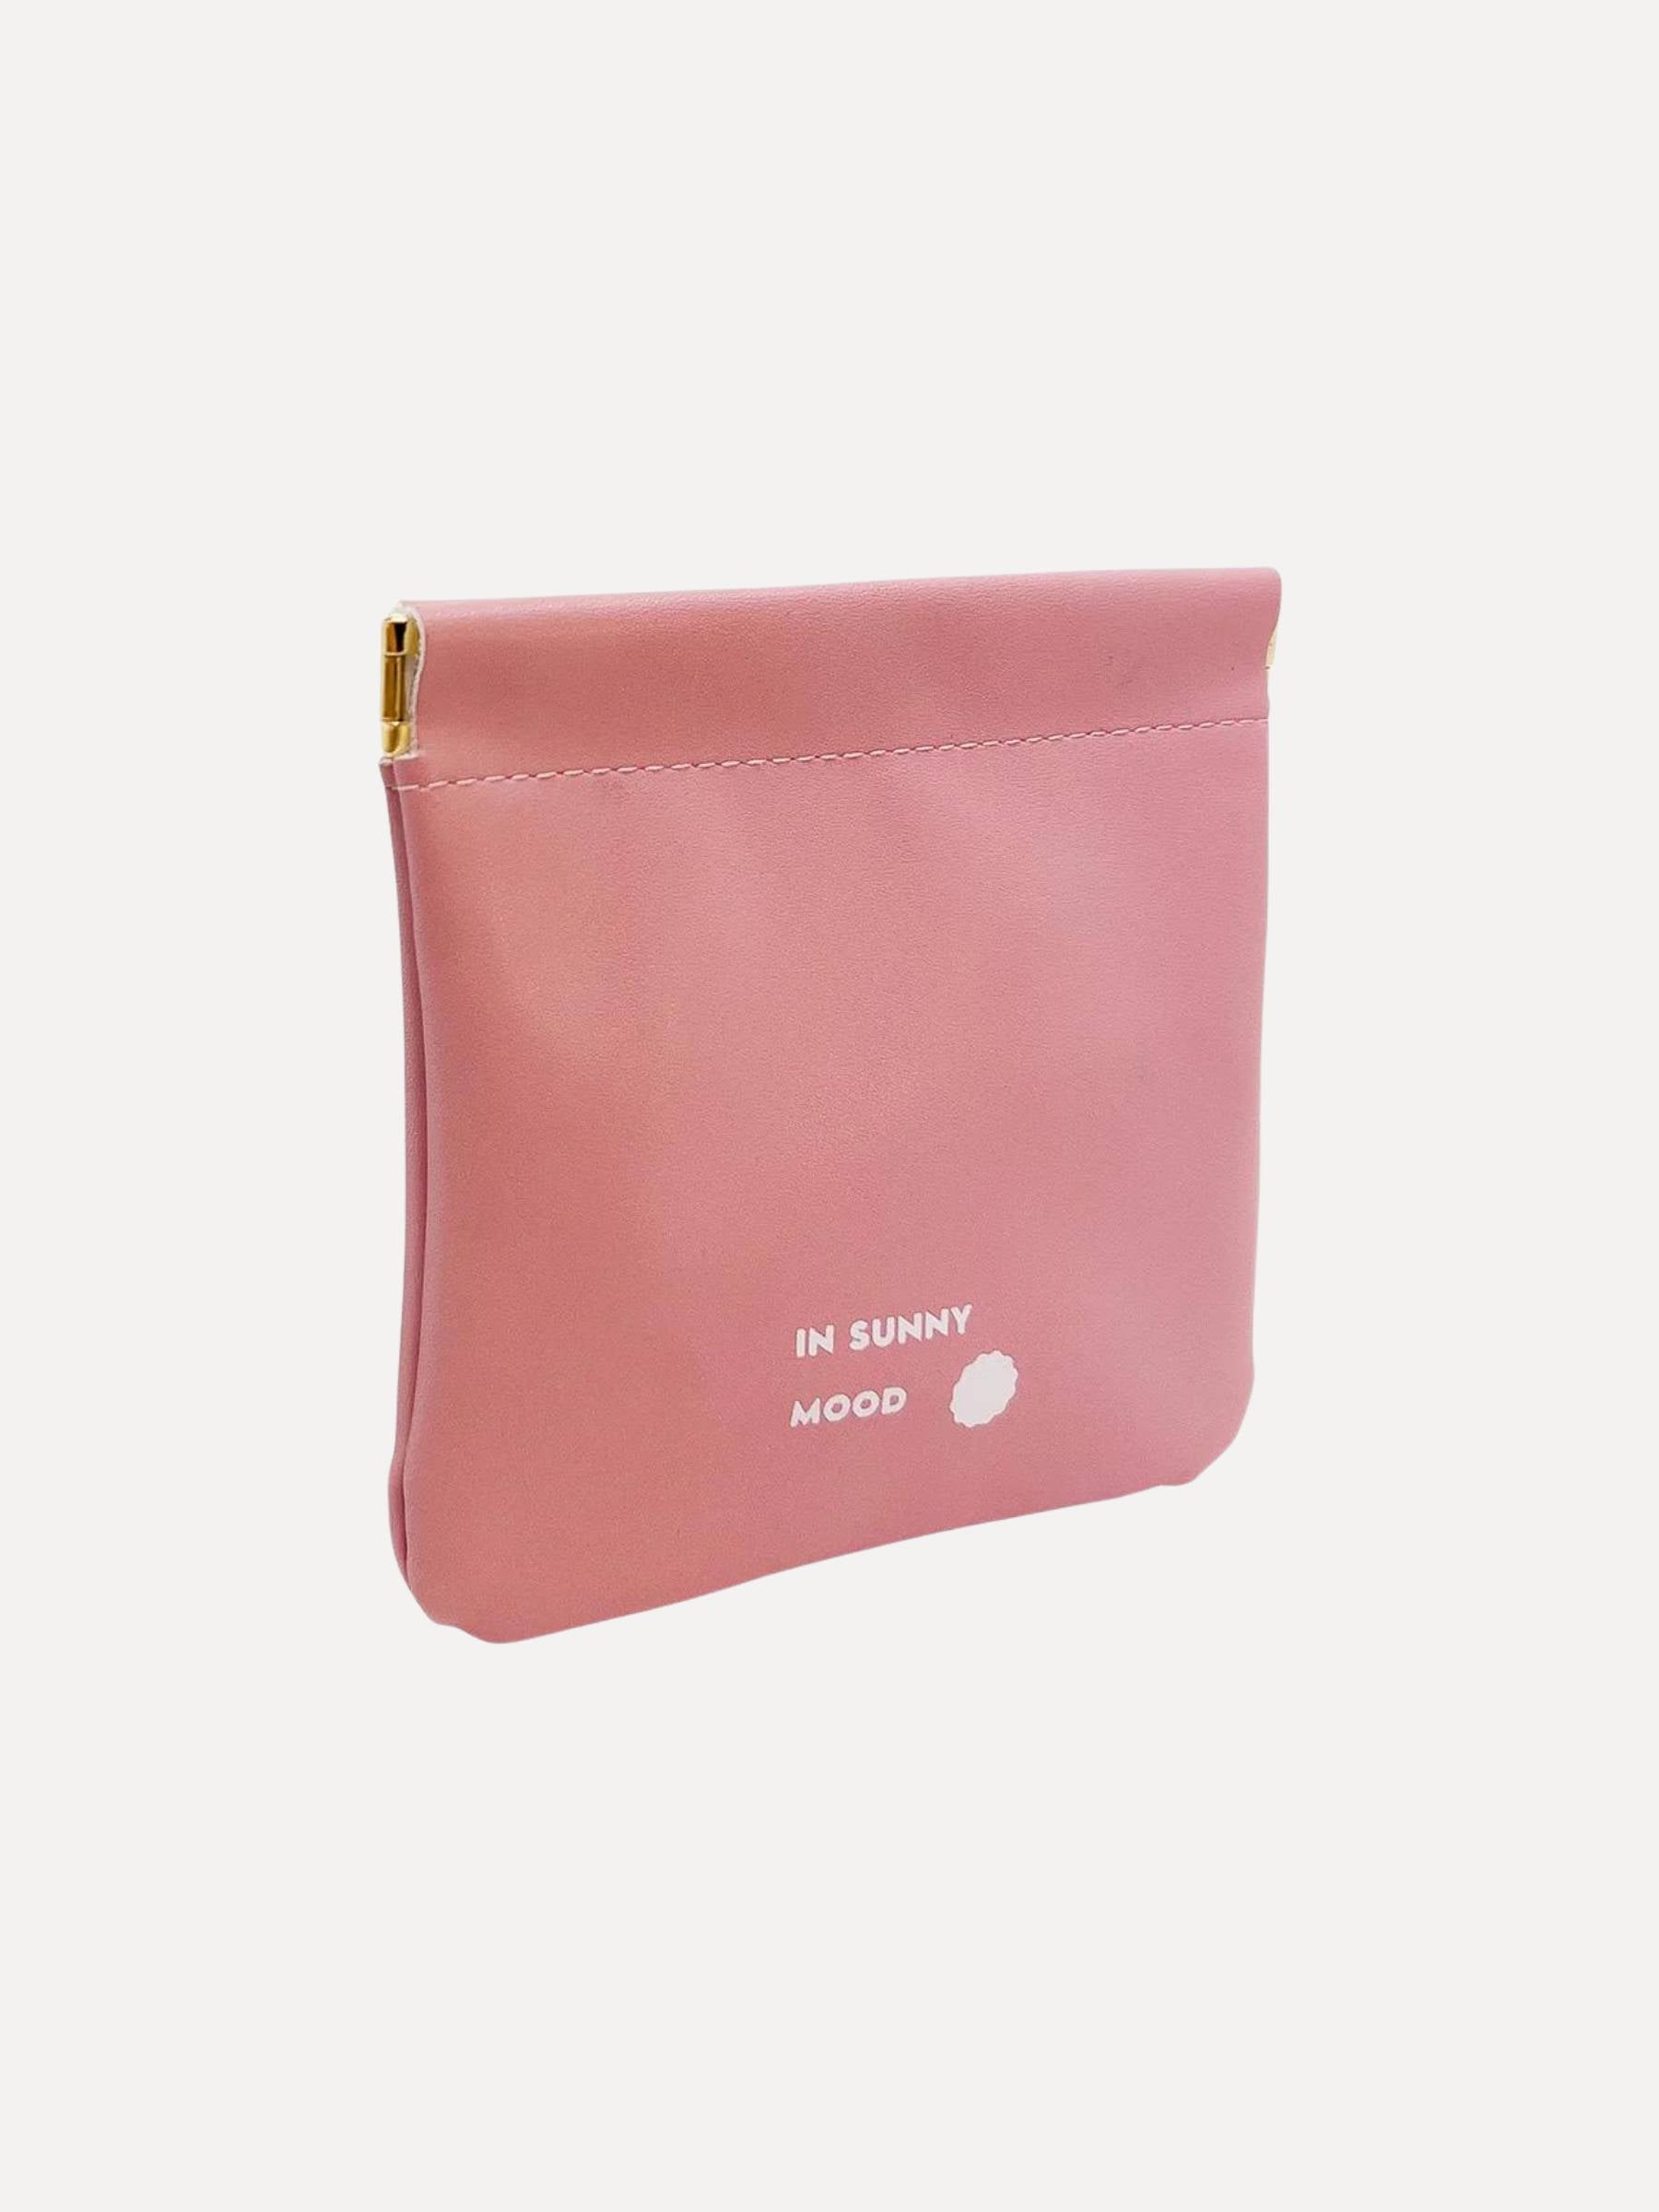 SUNNY Snap Pouch Small, Dusty Pink